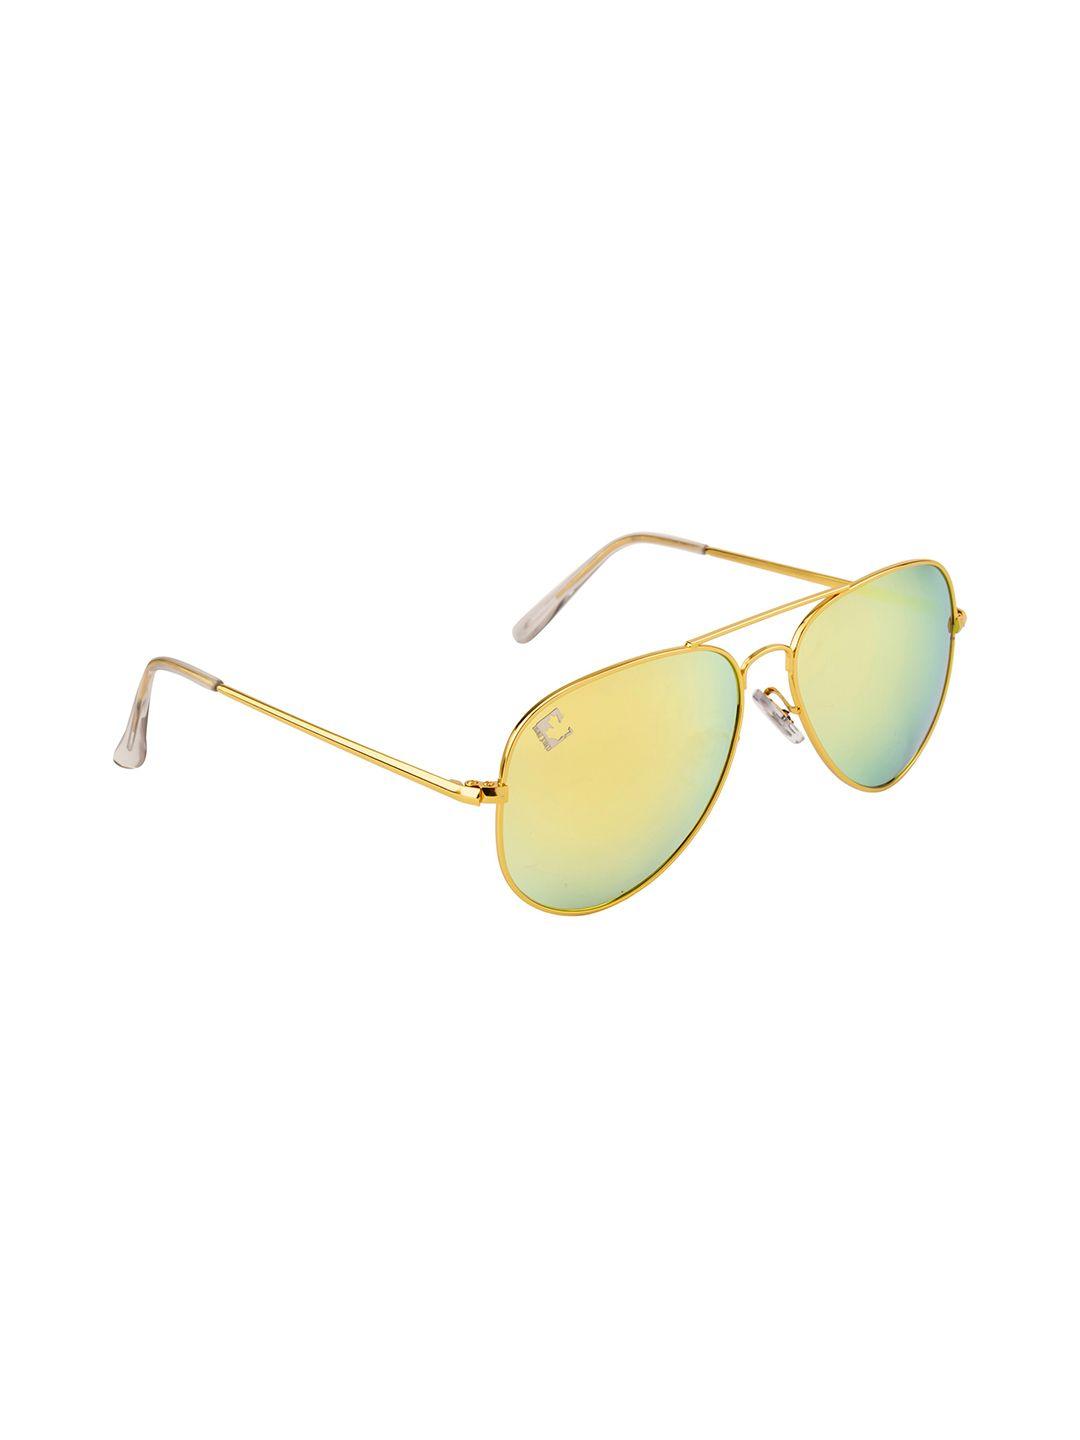 clark n palmer unisex aviator sunglasses with polarised and uv protected lens cnp-sbn-852